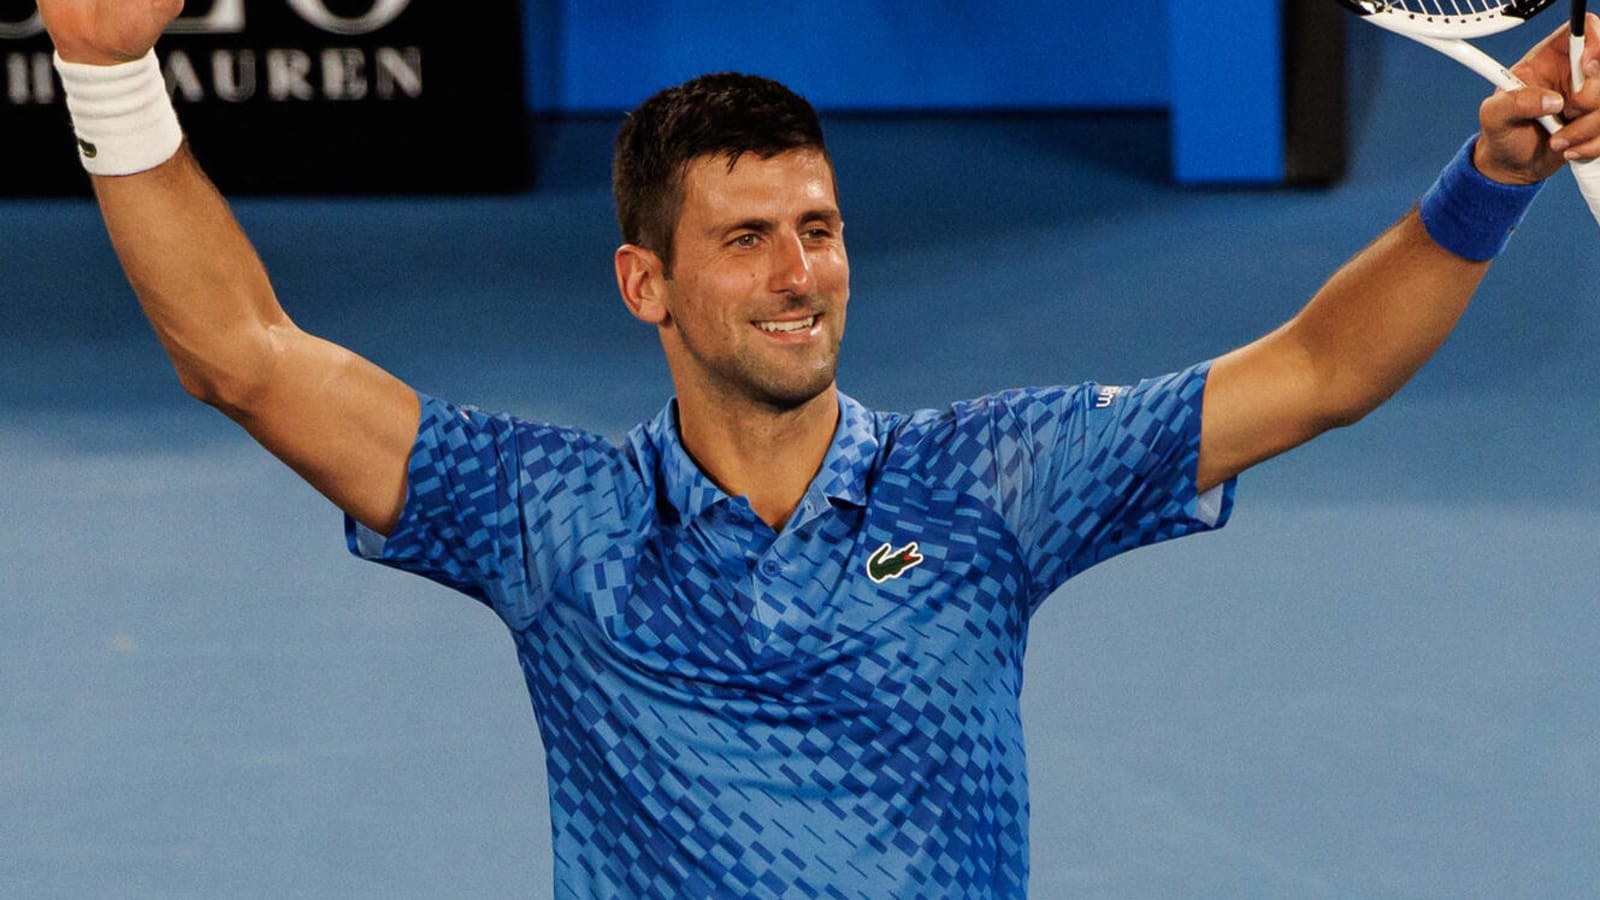 Djokovic on track for men's Grand Slam record after Aussie Open win